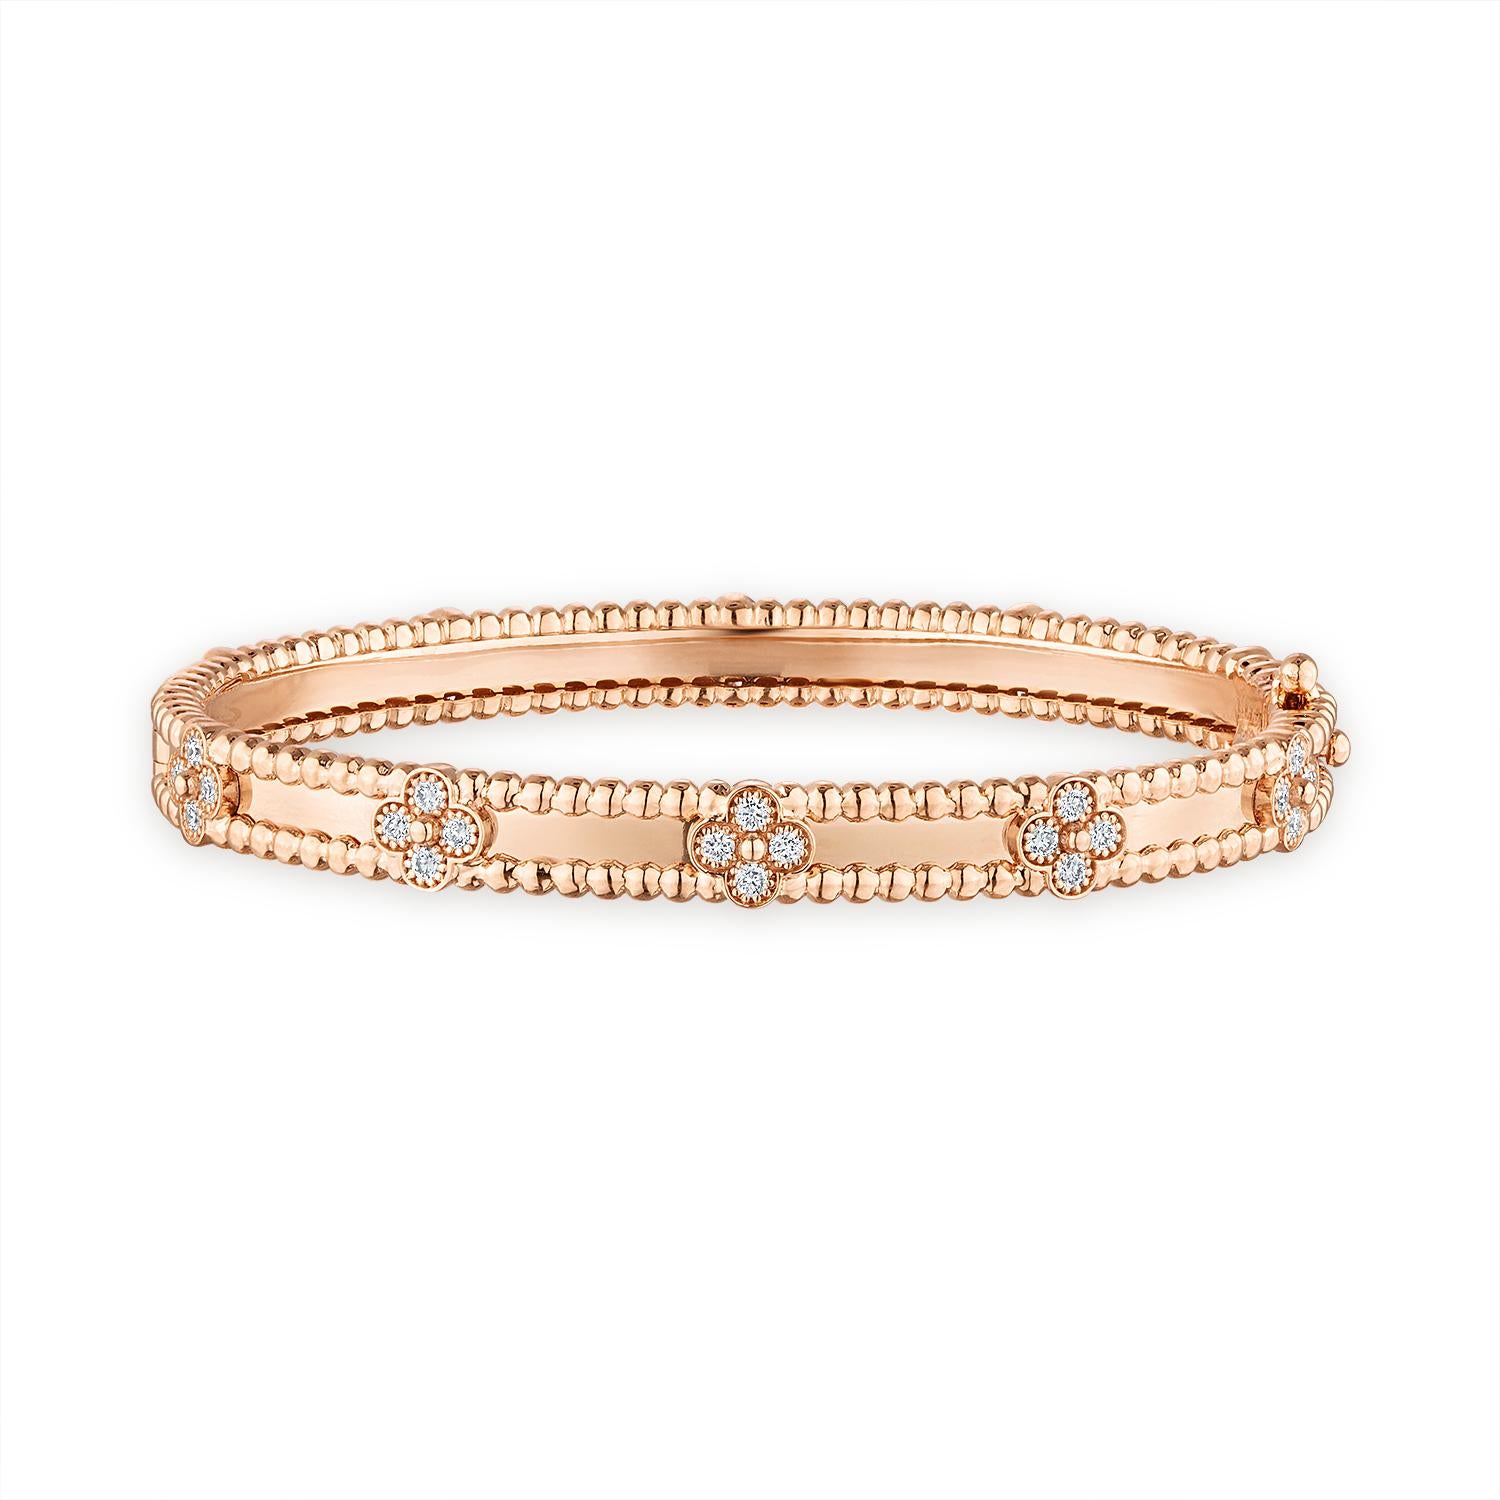 Sweet Perlee clover bangle bracelet size S that fits JUC 16 or LOVE 17. Rare to get at the boutiques. A narrow slim design that would add to your stack.

Maker: Van Cleef & Arpels

Accessories: Boxes and the original certificate dated 2021